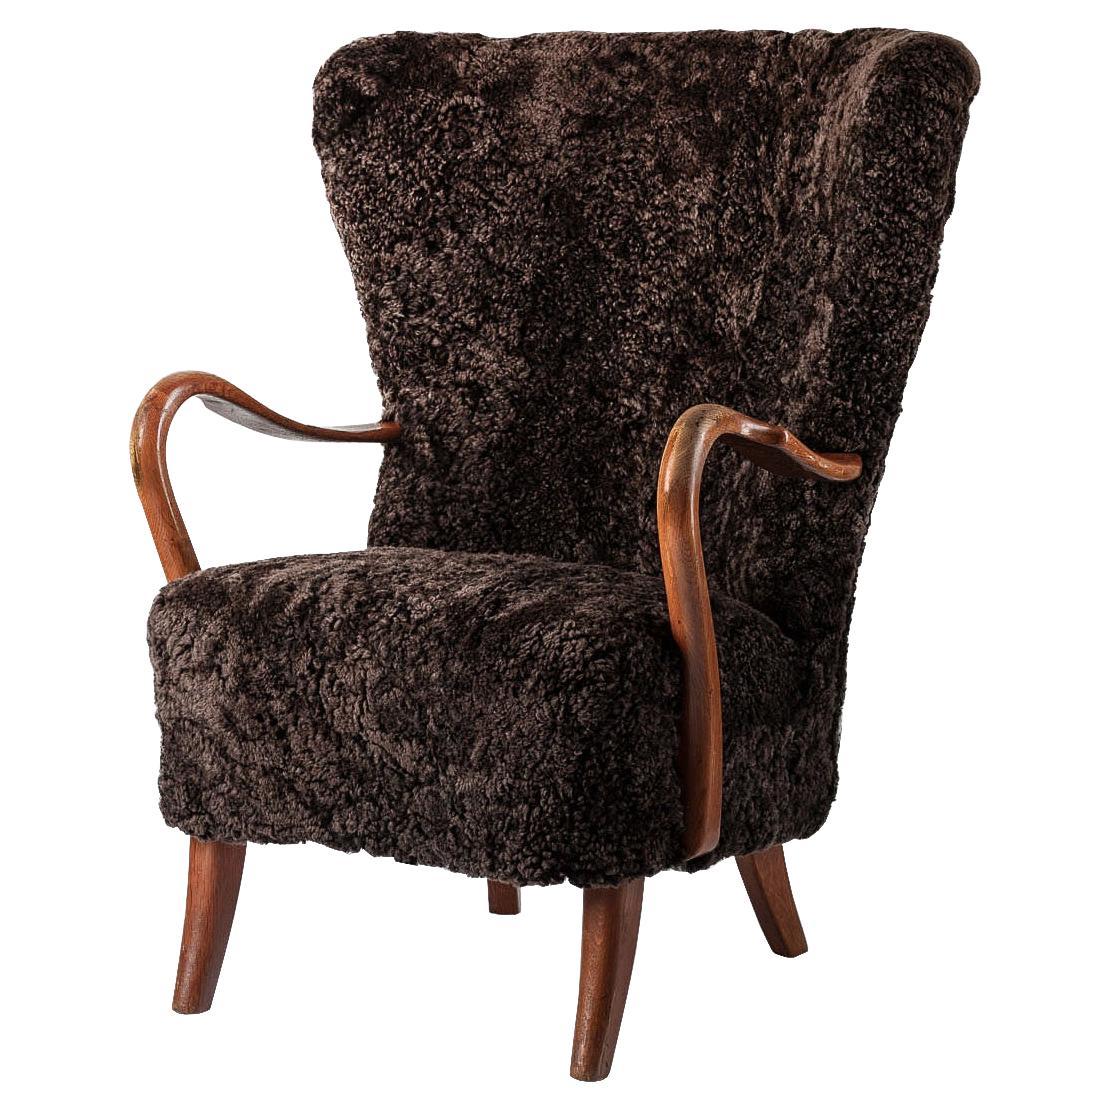 Alfred Christensen Wingback Chair in Brown Sheepskin, 1940s For Sale